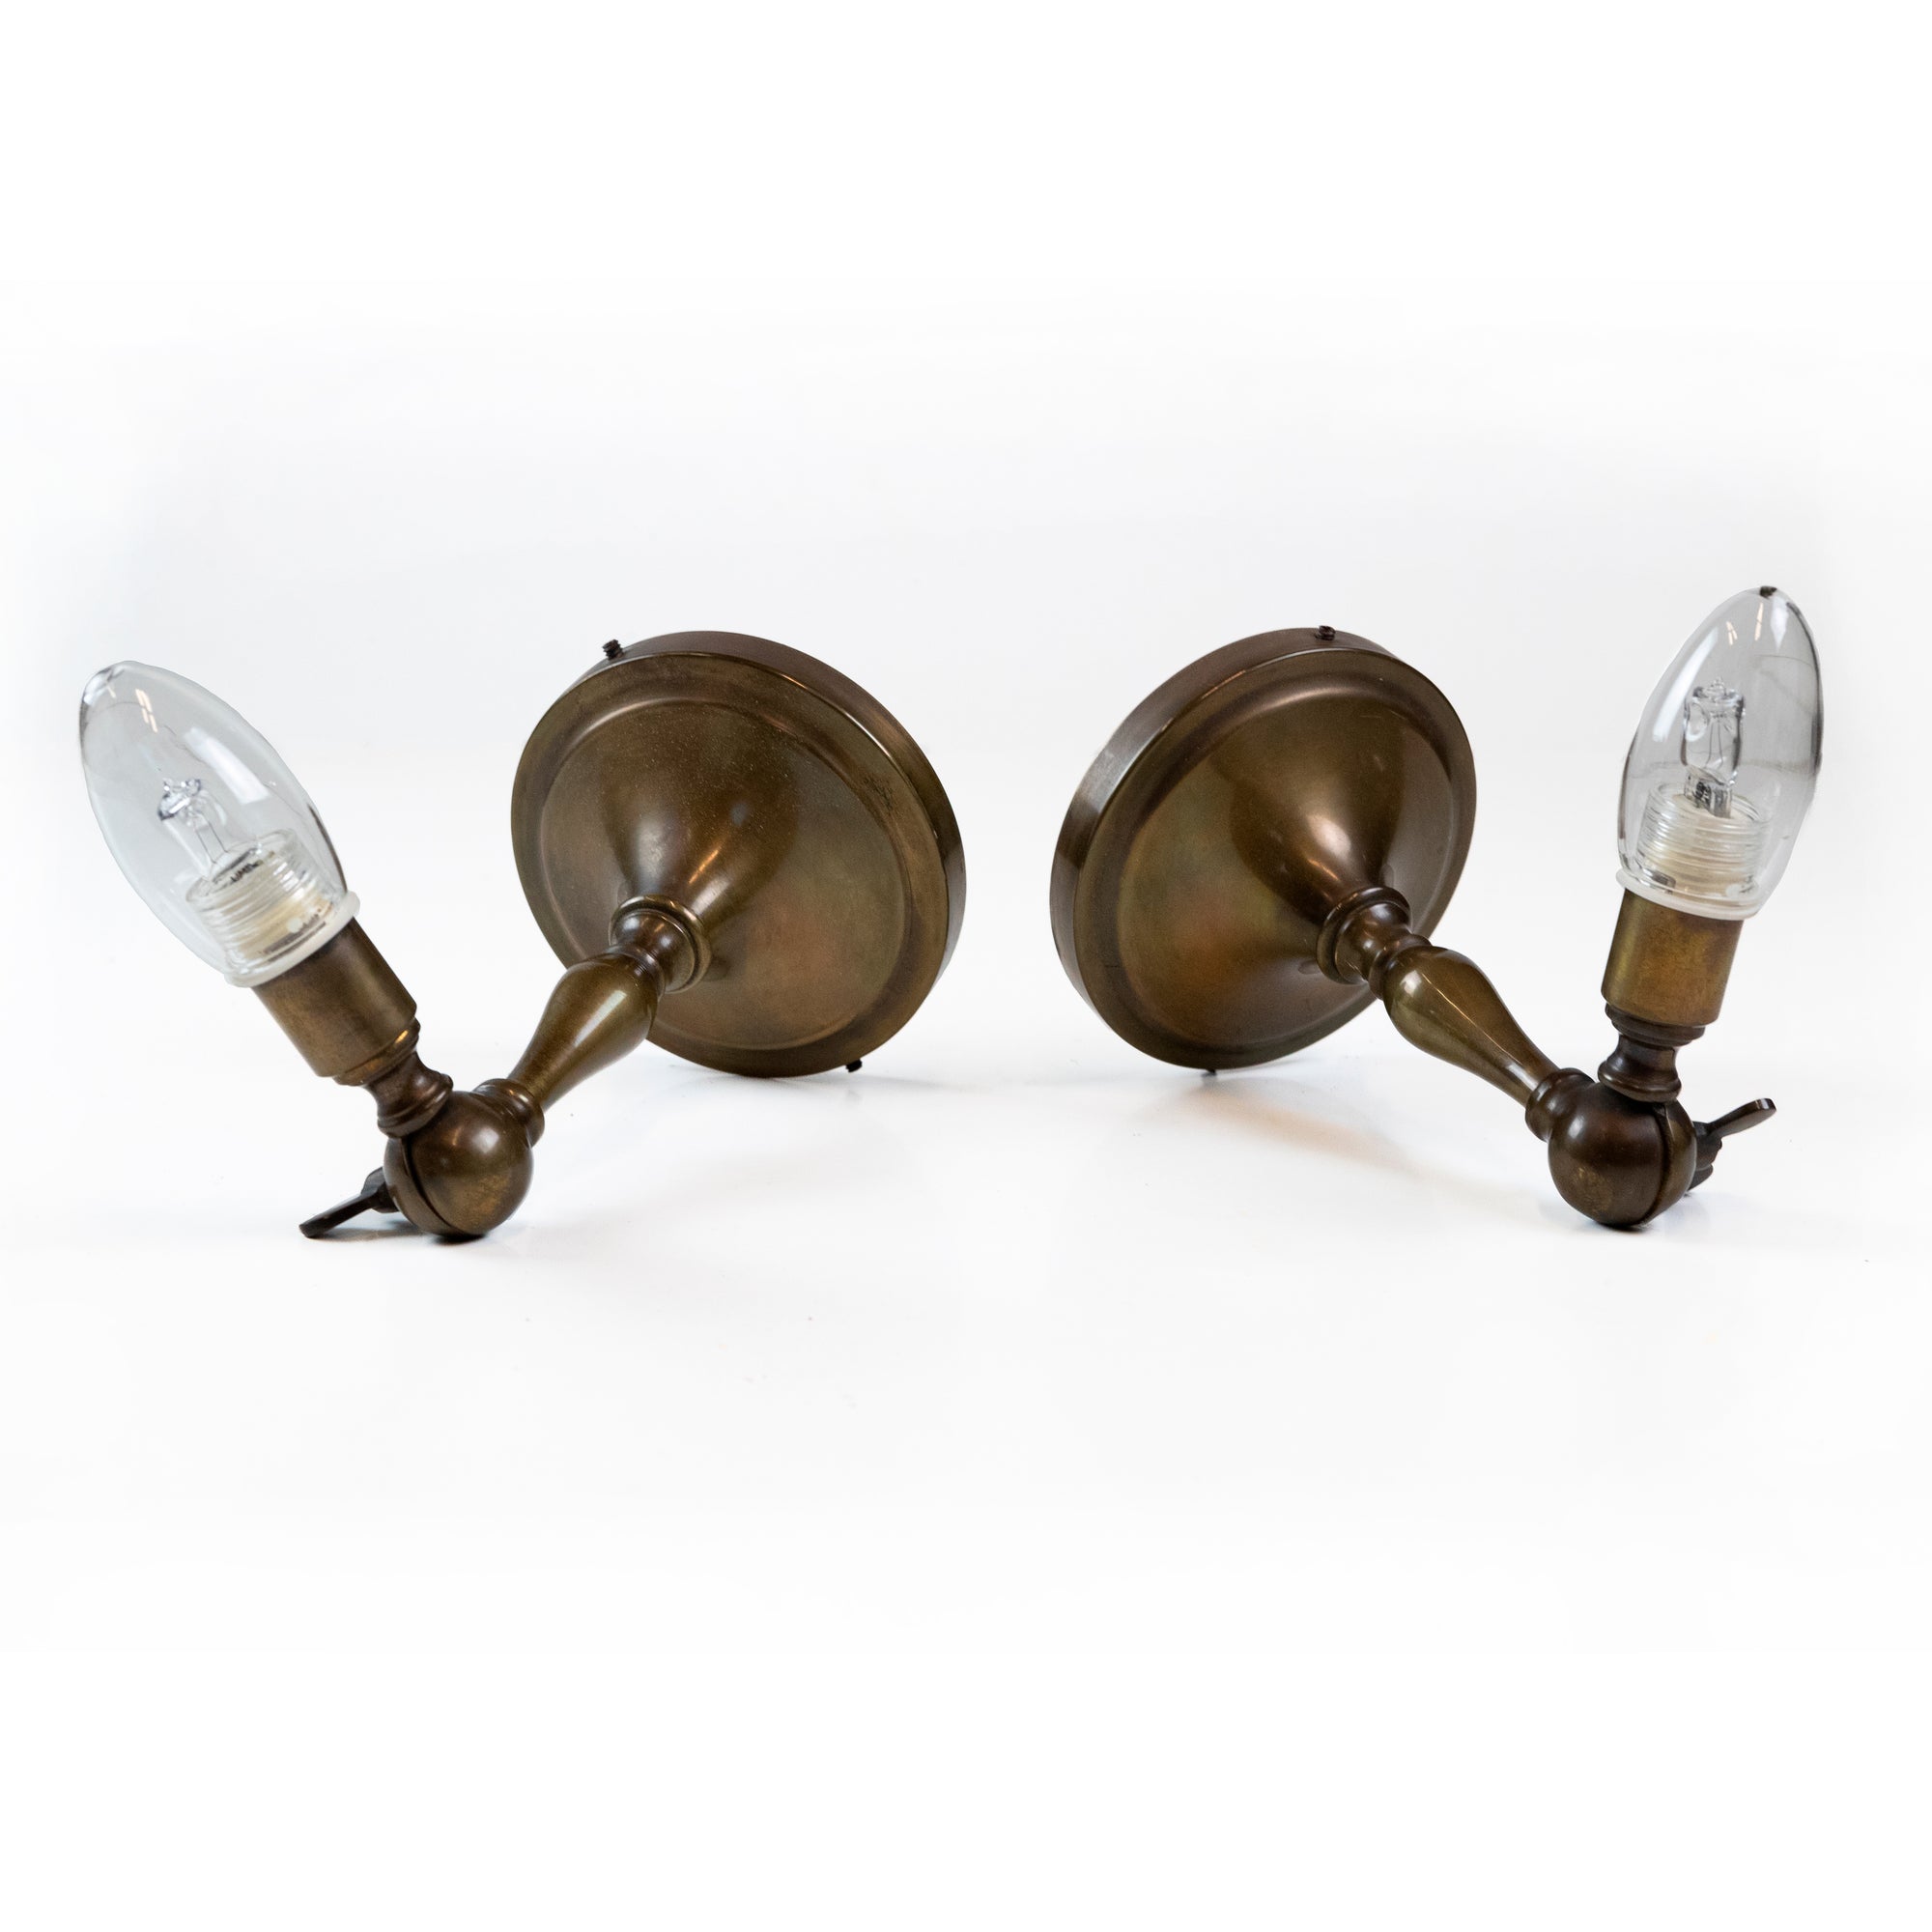 Reclaimed Pair of Besselink & Jones Wall Lights | The Architectural Forum